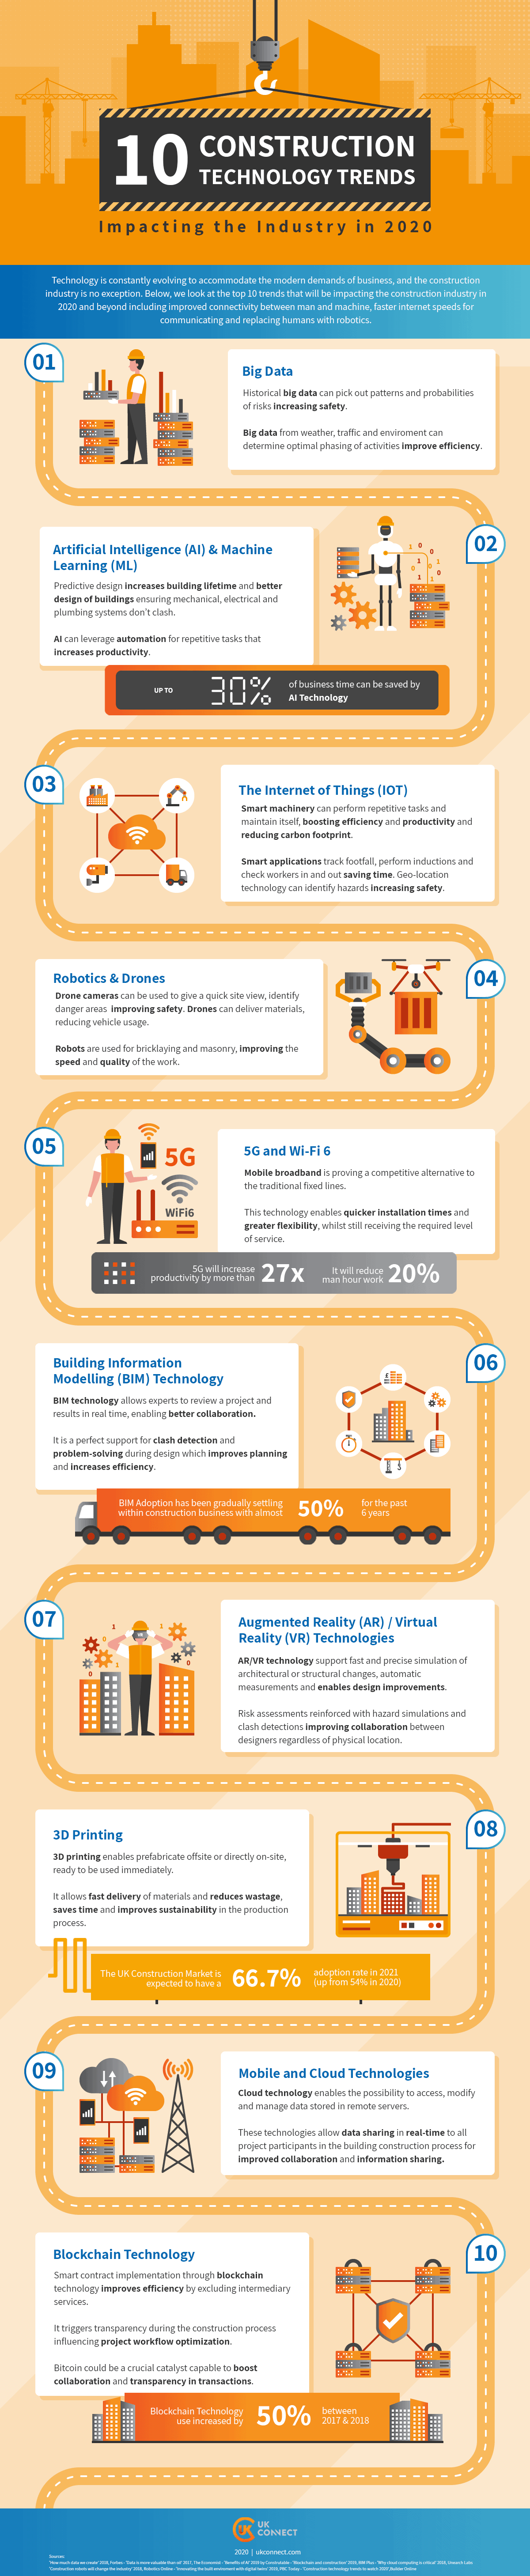 How is The Evolution of Technology Affecting The Construction Industry - Infographic